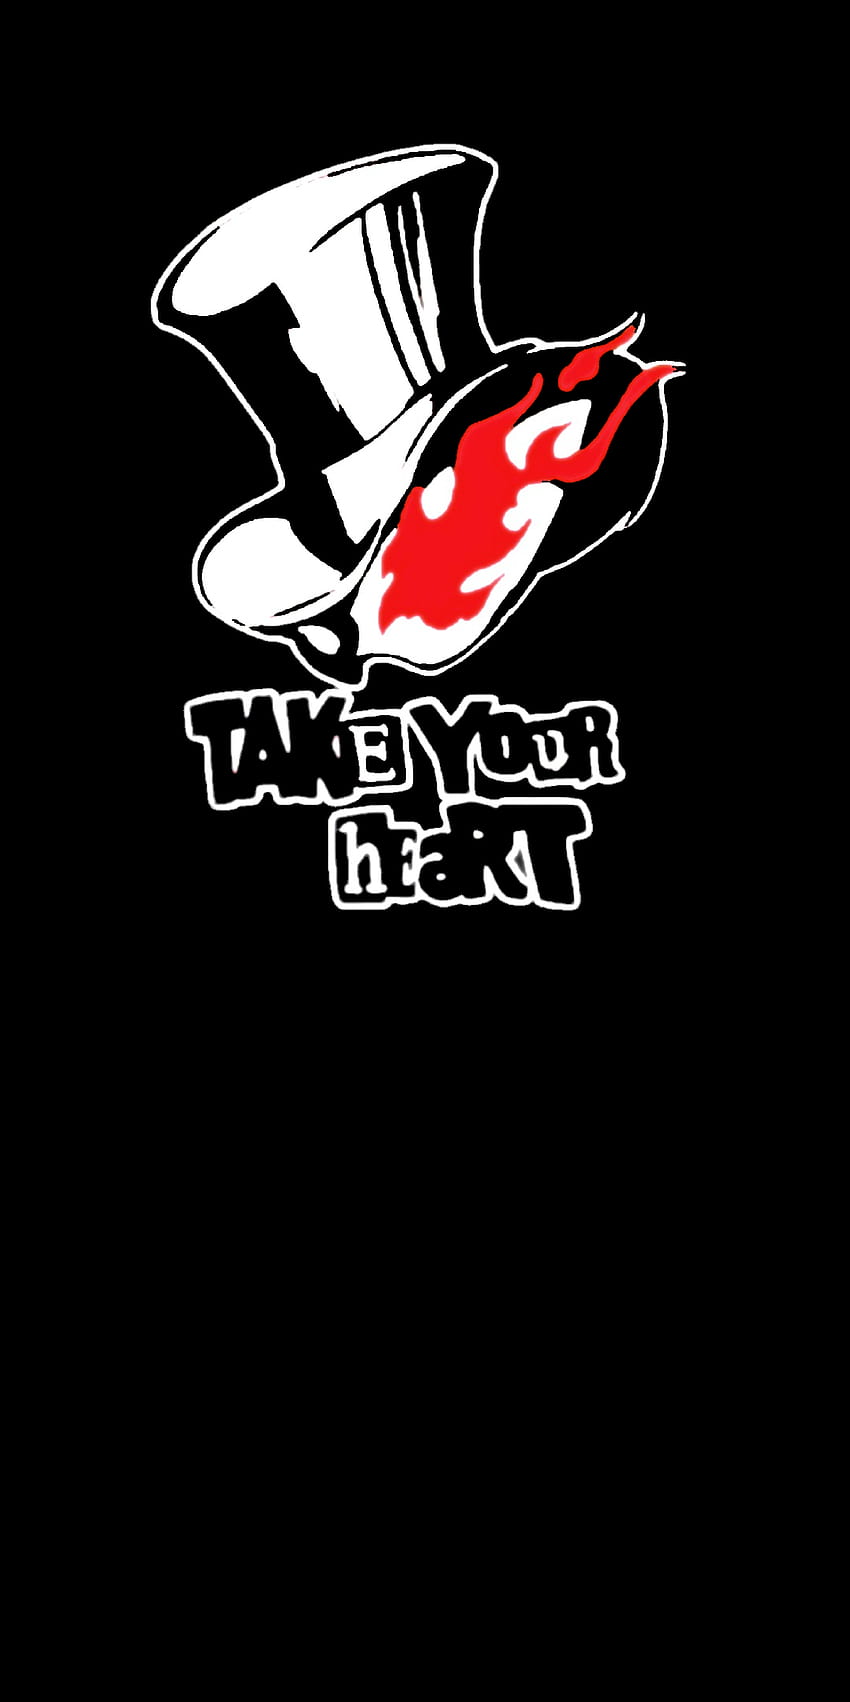 i Made A Minimalist take Your Heart Mobile, Persona 5 HD phone wallpaper